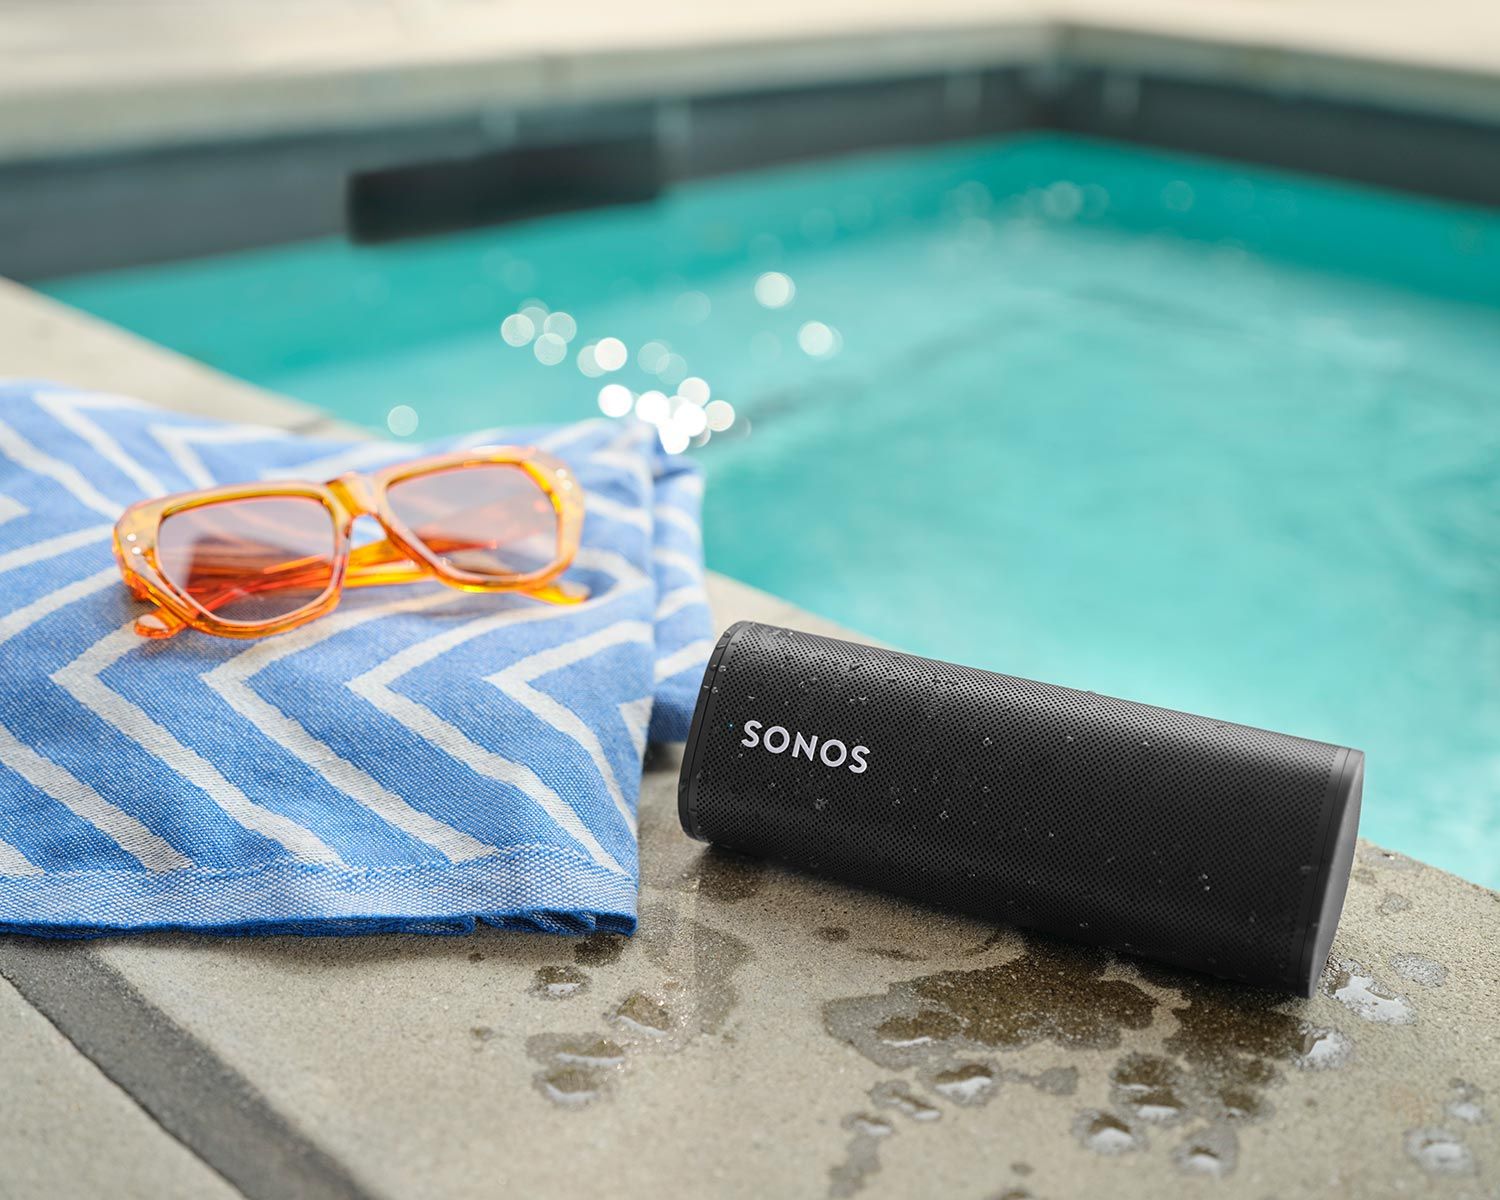 A Sonos portable speaker placed next to a swimming pool with a pair of sunglasses on a towel nearby.